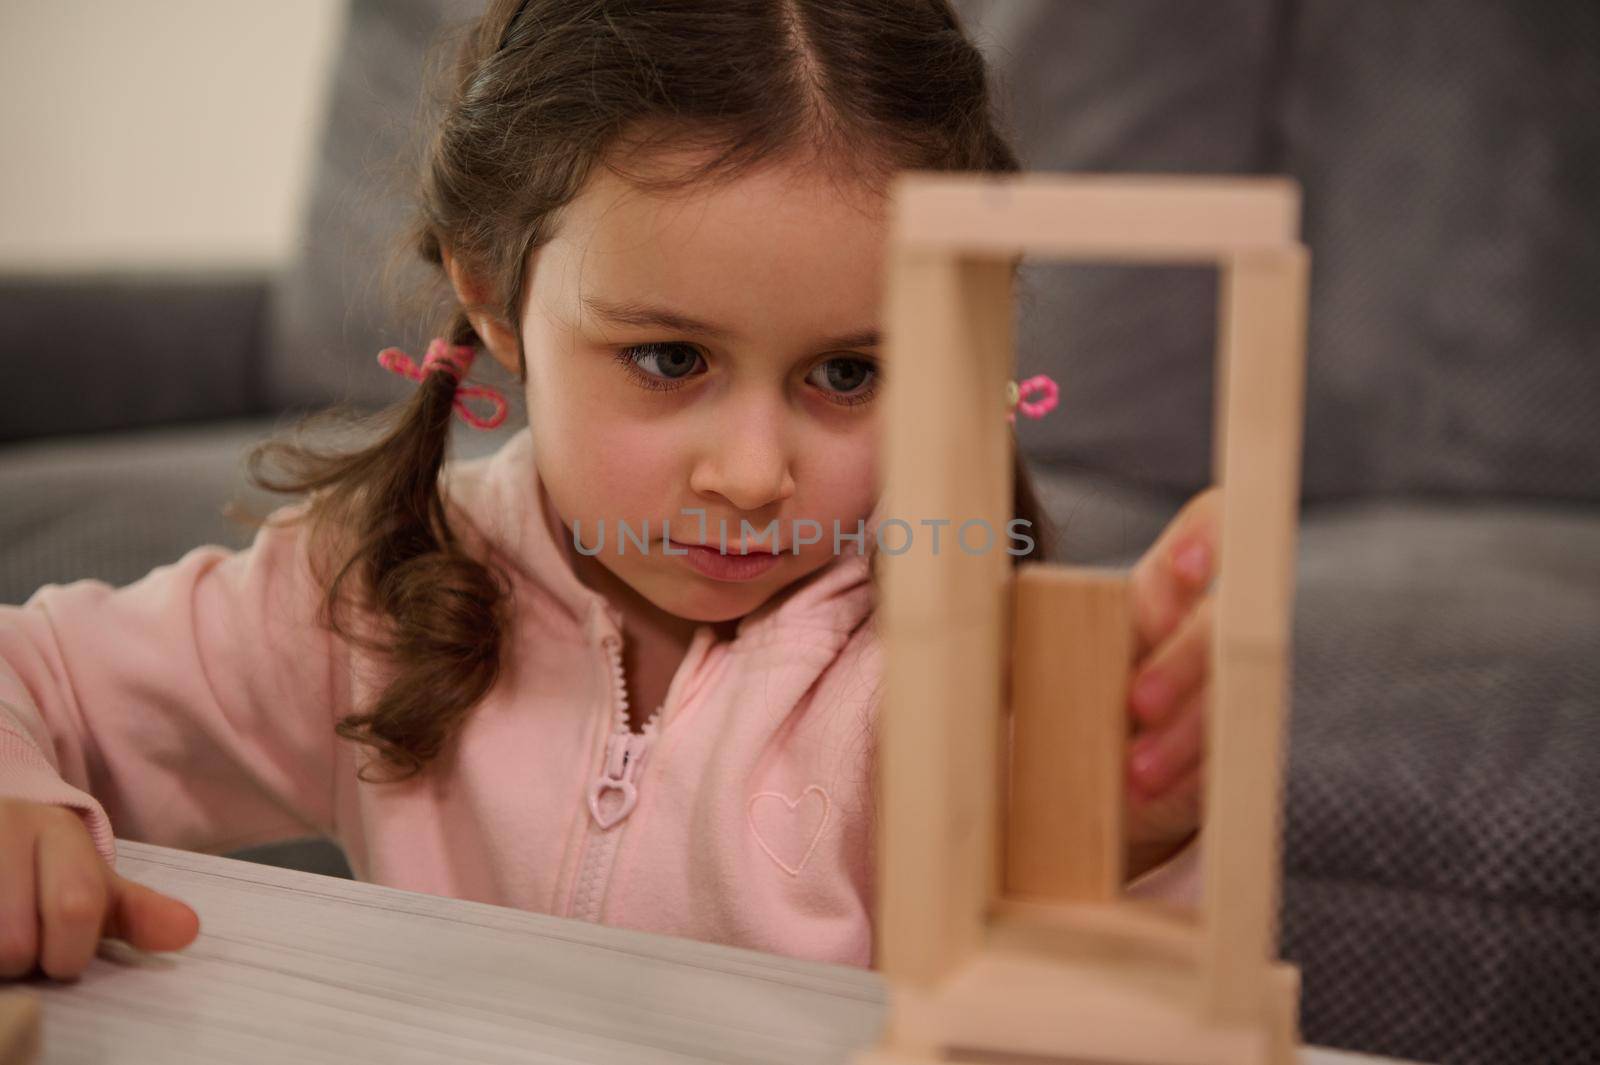 Close-up portrait of adorable Caucasian child, preschool girl in pink sweatshirt concentrated on building wooden structure with wooden blocks. Board games and fine motor skills development concept